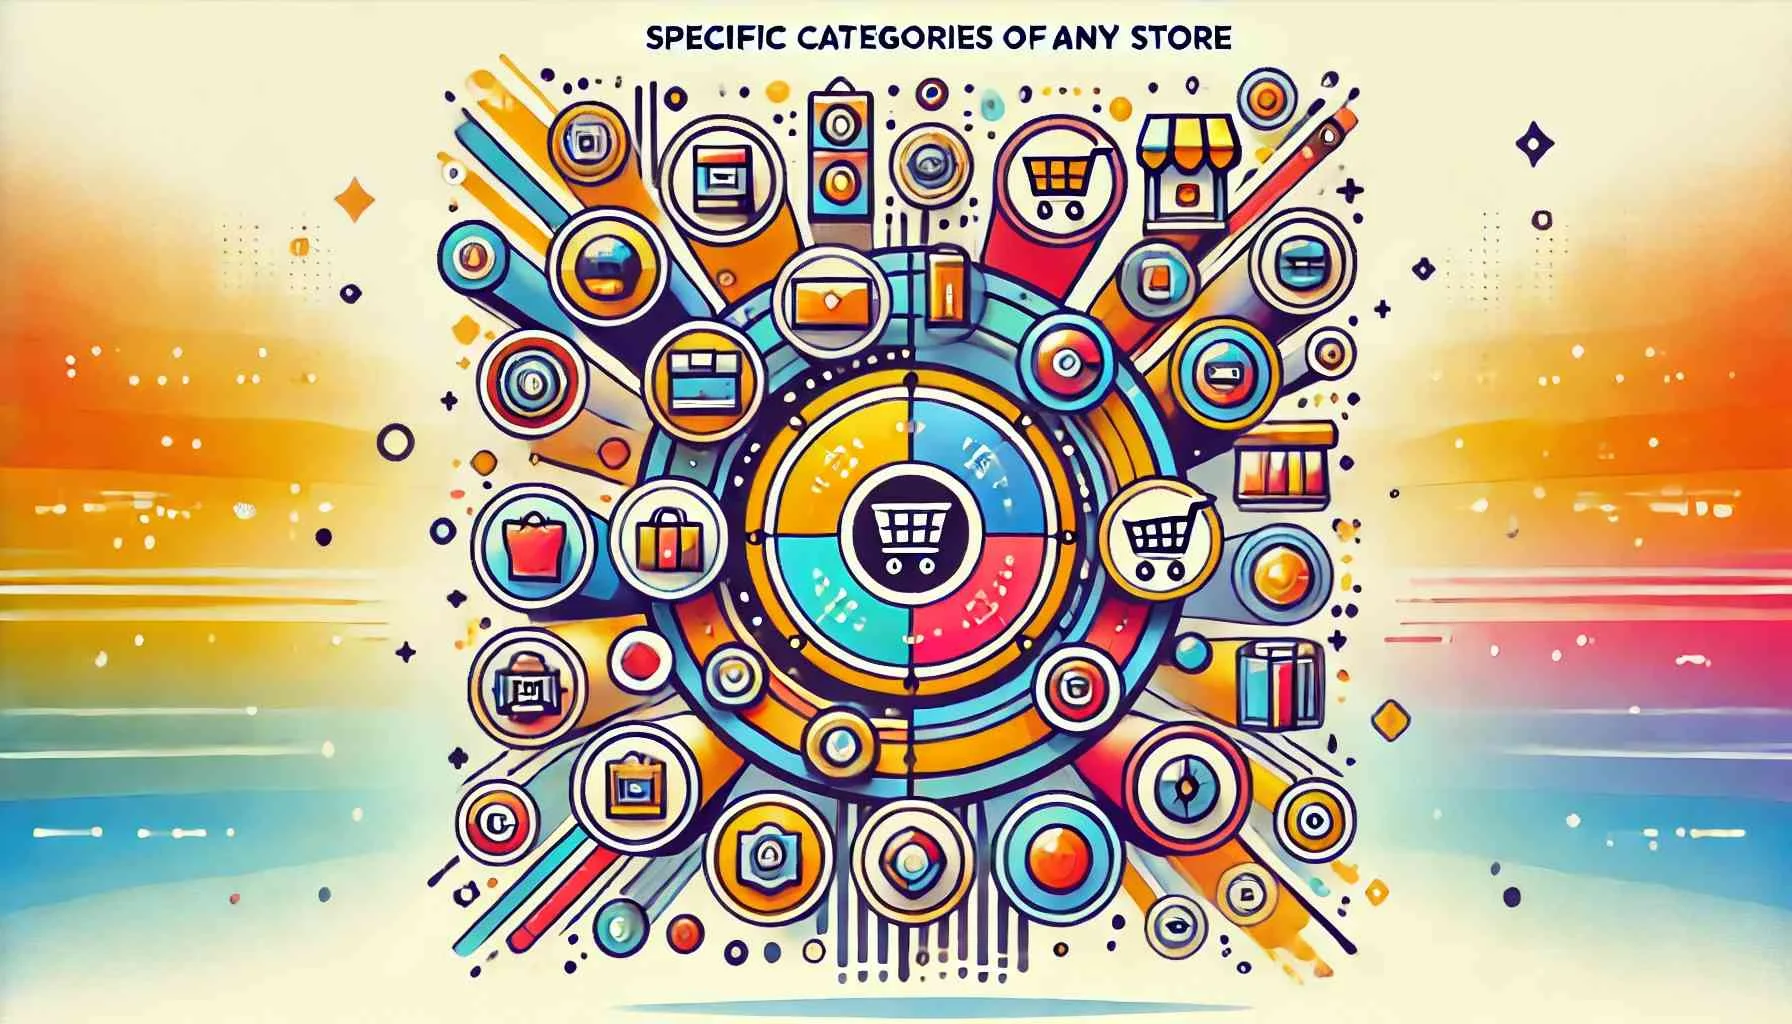 Themed Illustration Depicting The Concept Of Specific Categories Of Any Store. The Image Should Use Vibrant And Mo 20240714